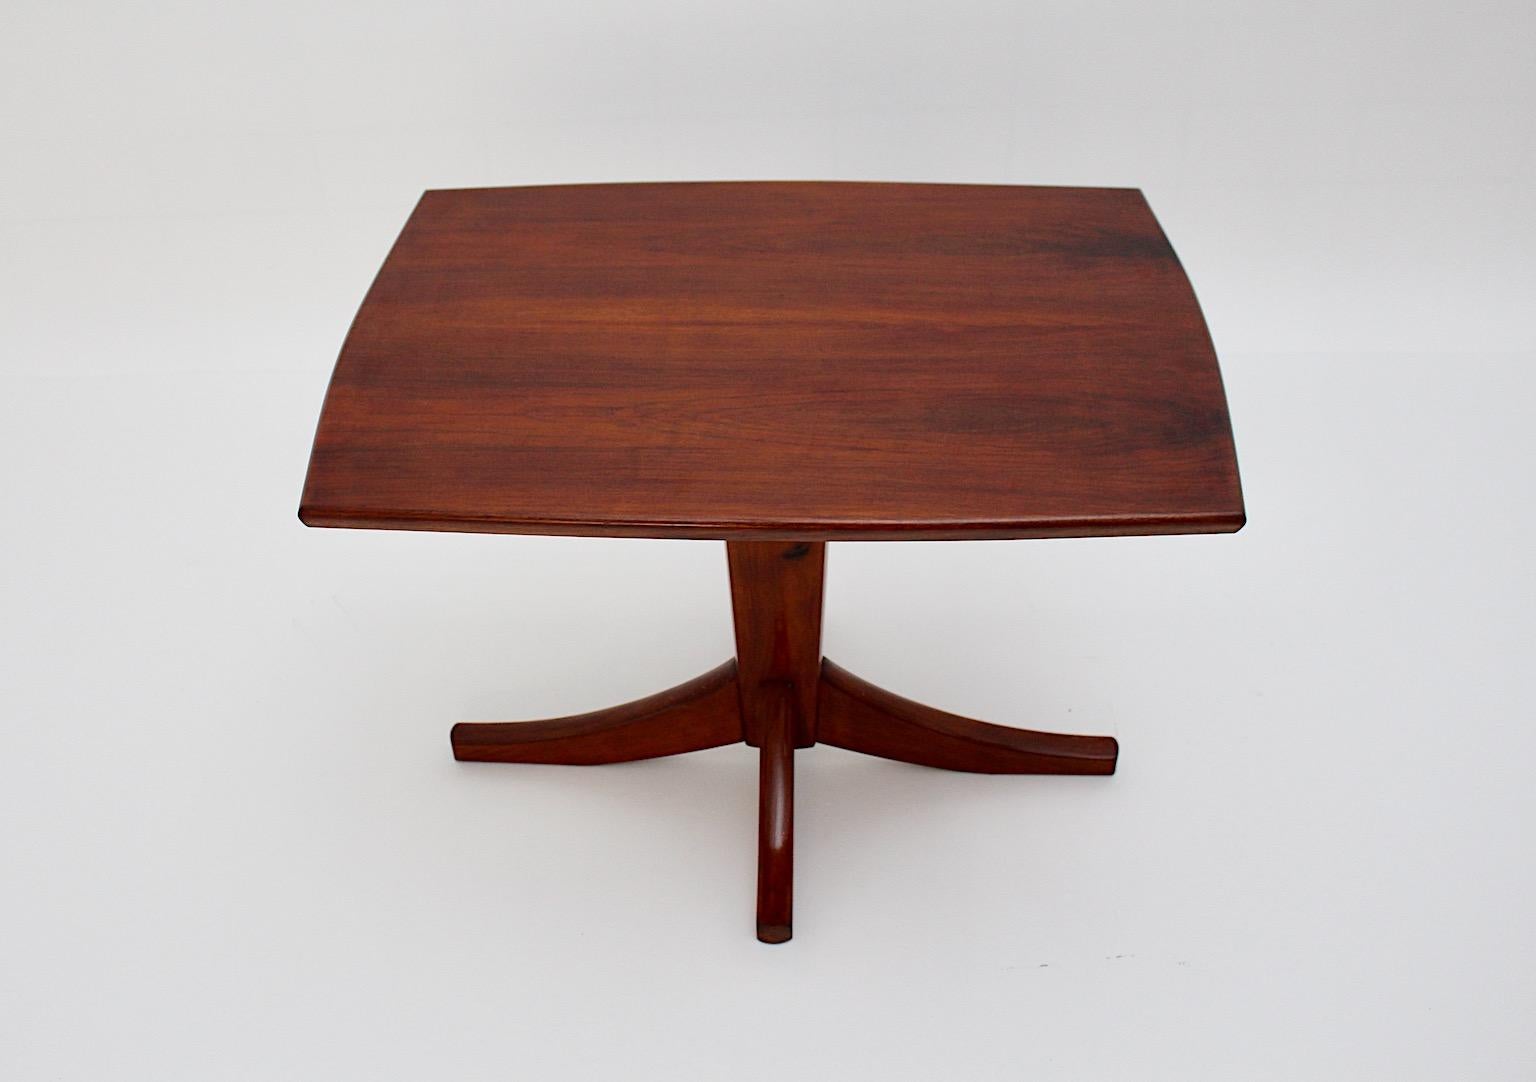 Art Deco Vintage Walnut Rectangular Side Table Josef Frank circa 1925 Austria In Good Condition For Sale In Vienna, AT